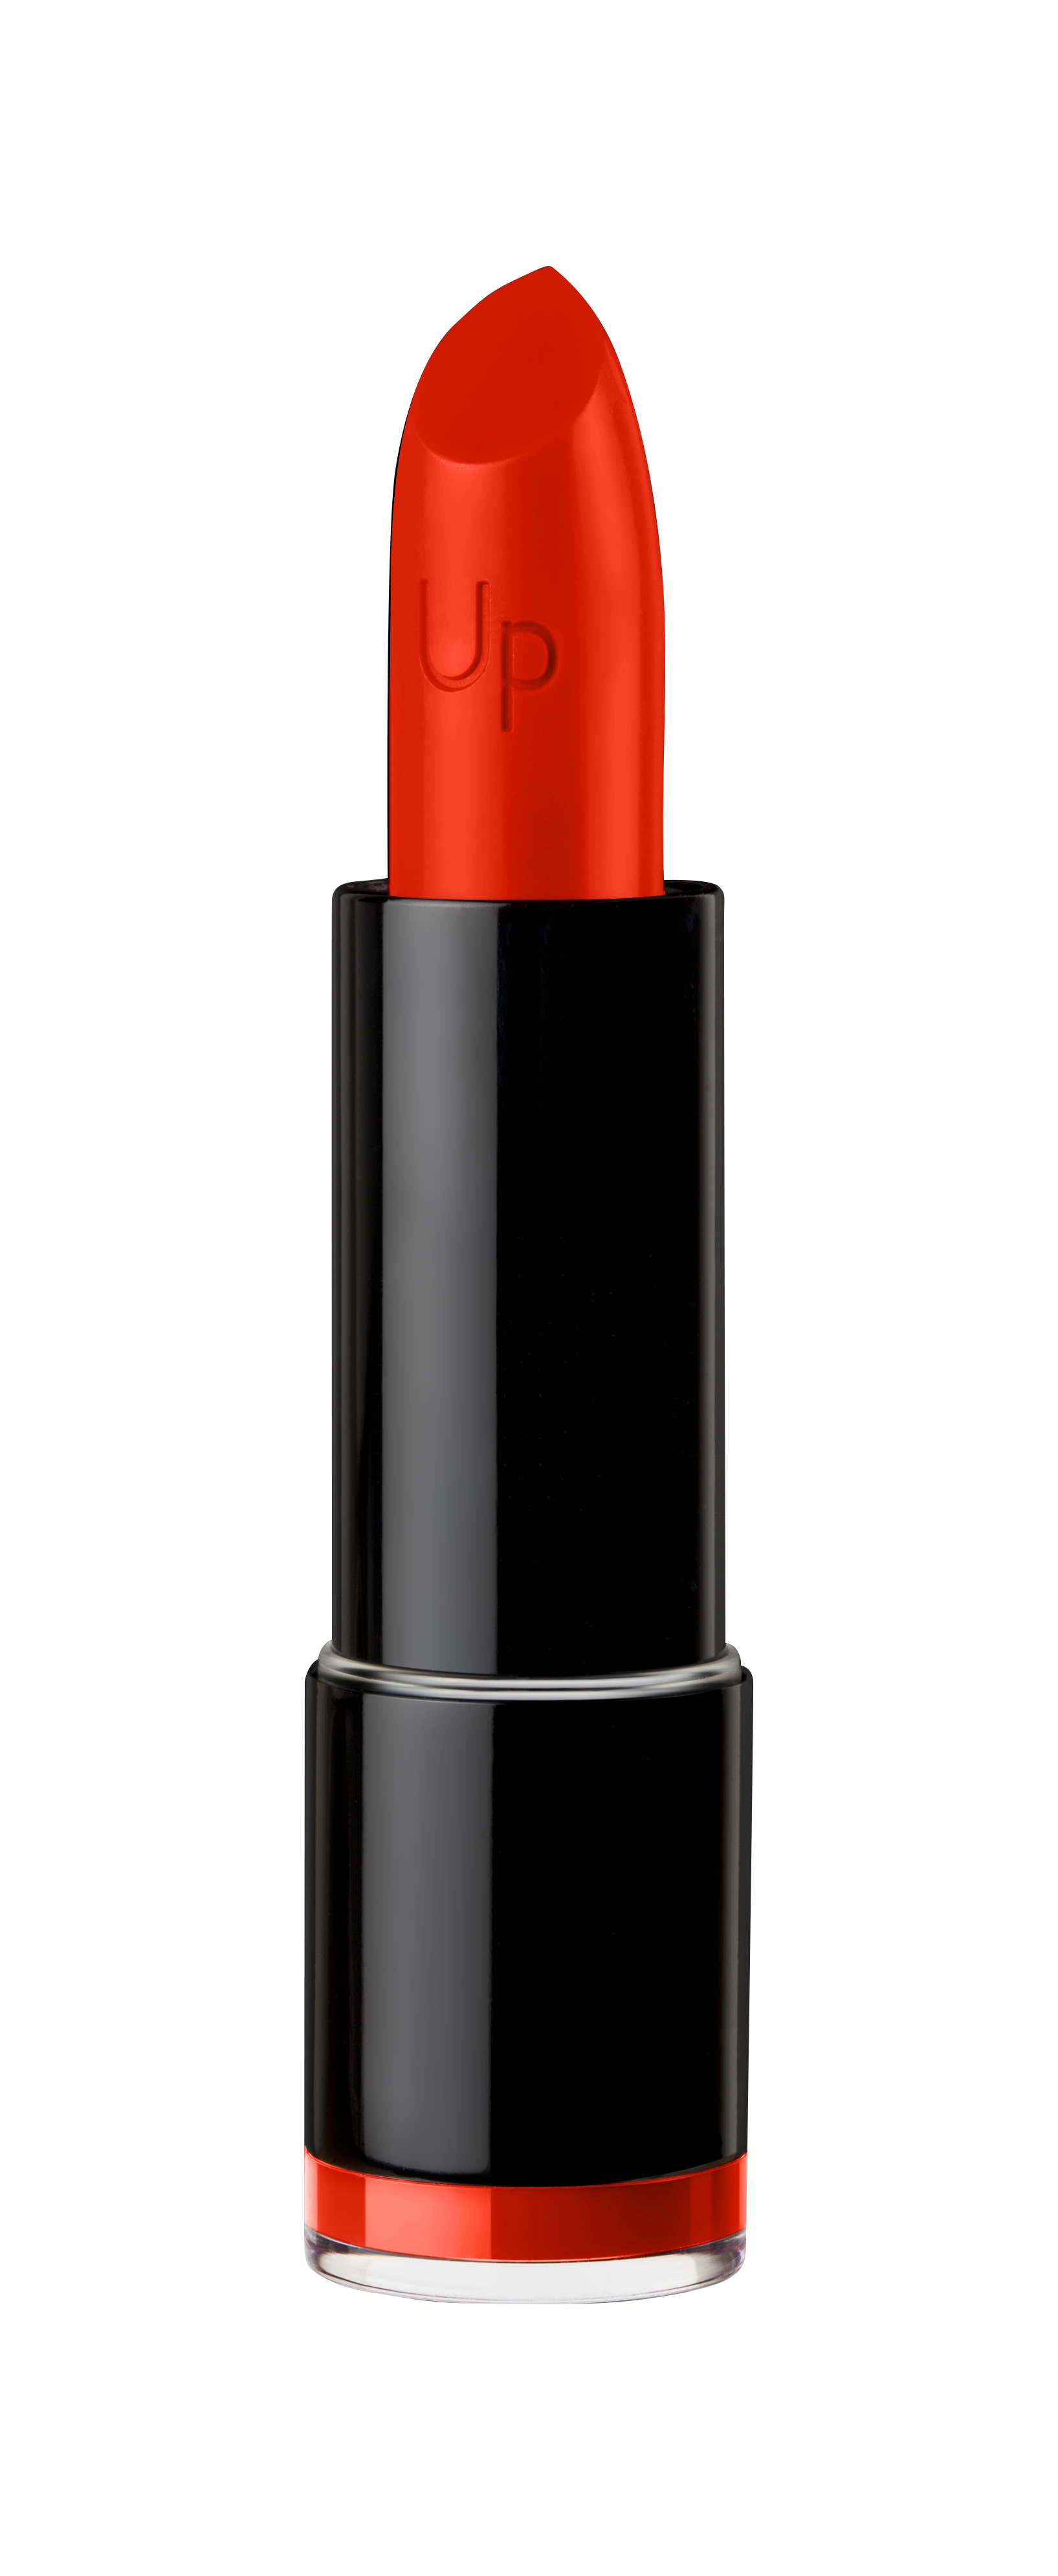 Lipstick PNG Images HD